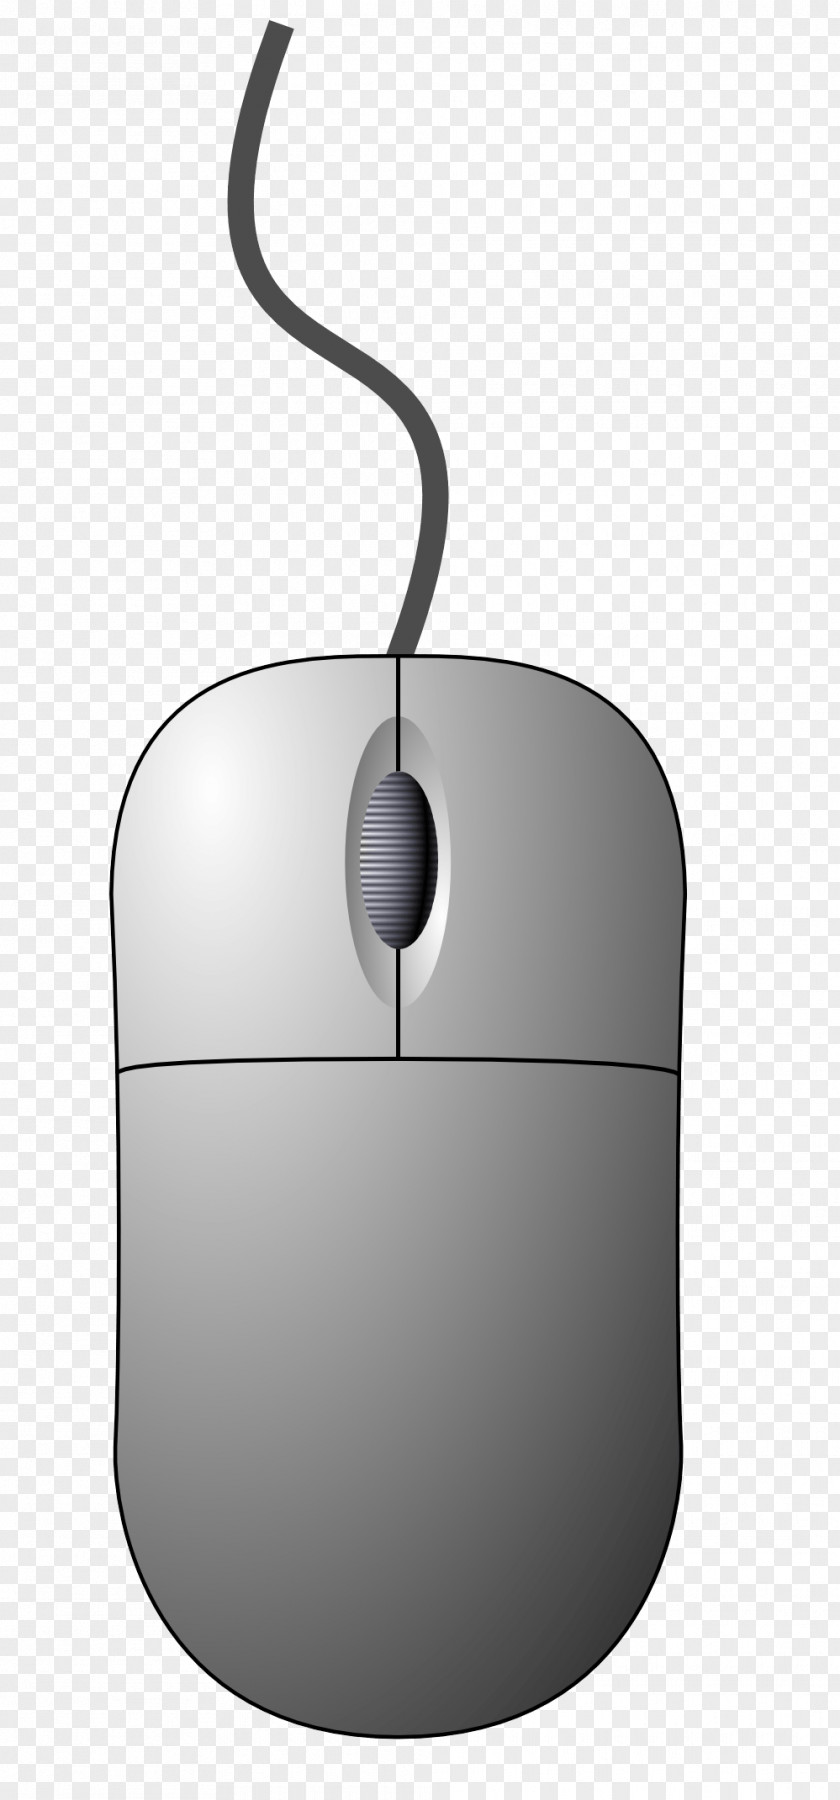 Pc Mouse Image Computer Keyboard Button Mickey PNG